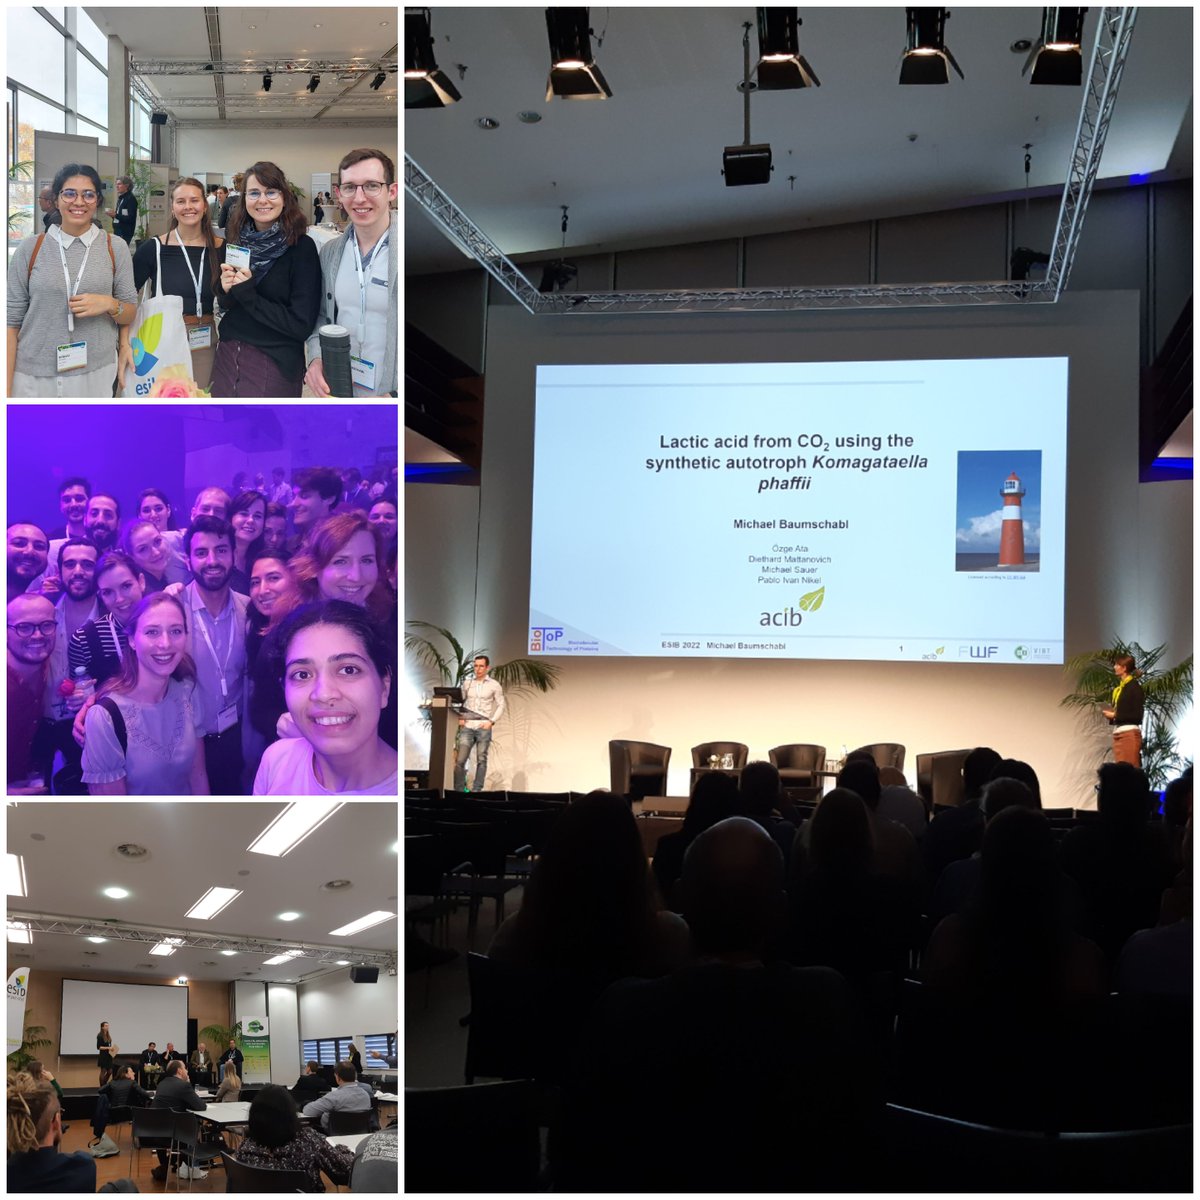 Throwback to the roaring success of #esib2022 and #Pichia2022 at #Graz where our @BOKU_IMMB community contributed to the excellent scientific sessions🤓... and even took the time to network 🥳 @acibGmbH @BOKUvienna